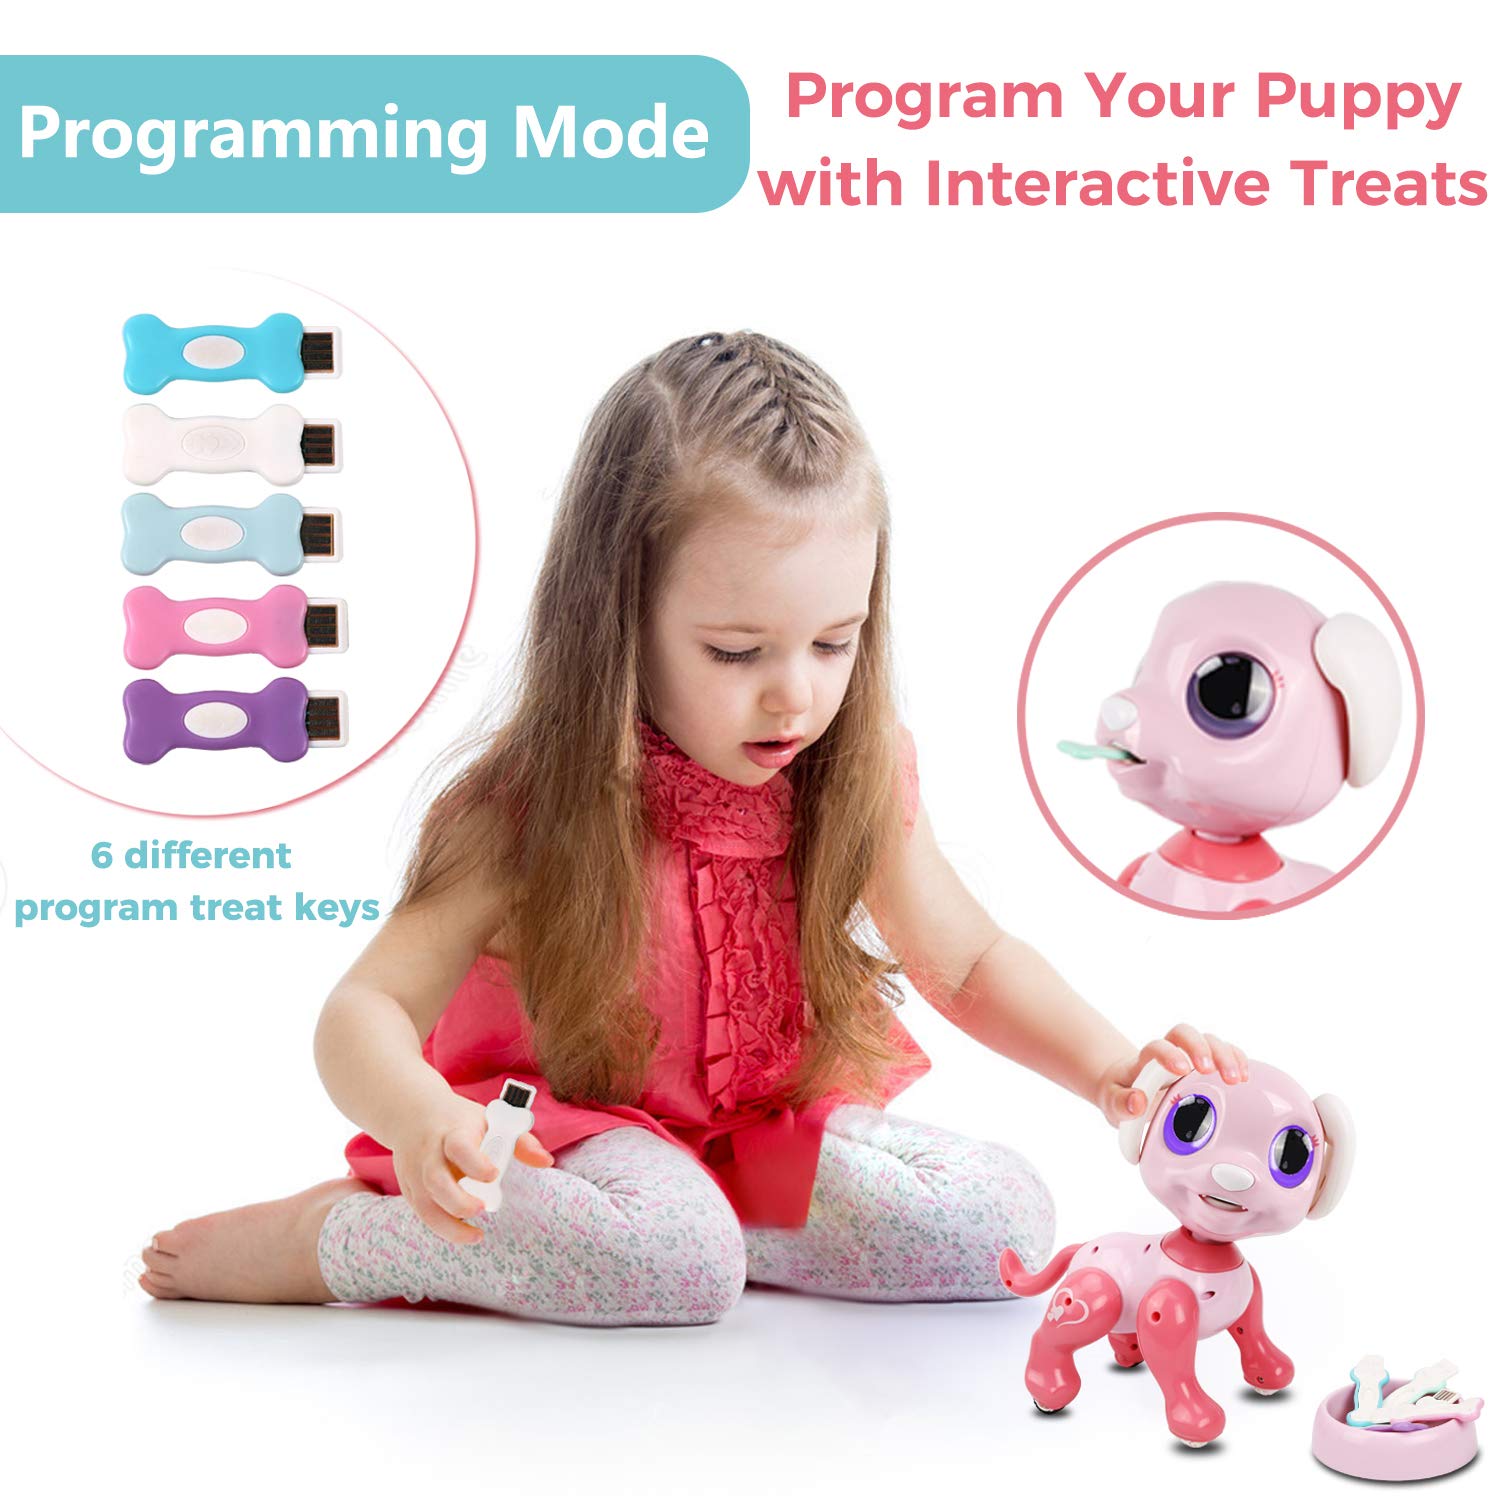 RACPNEL RC Robot Dog Toy: Interactive, Walking, Dancing, Programmable Puppy - Gesture Sensing, Lights, Sounds - Ages 3+, Pink